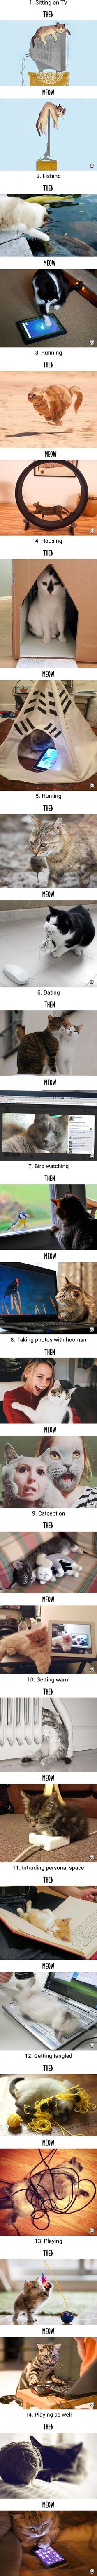 Then vs Meow: How Technology Has Changed Cats??? Lives (via 9gag)